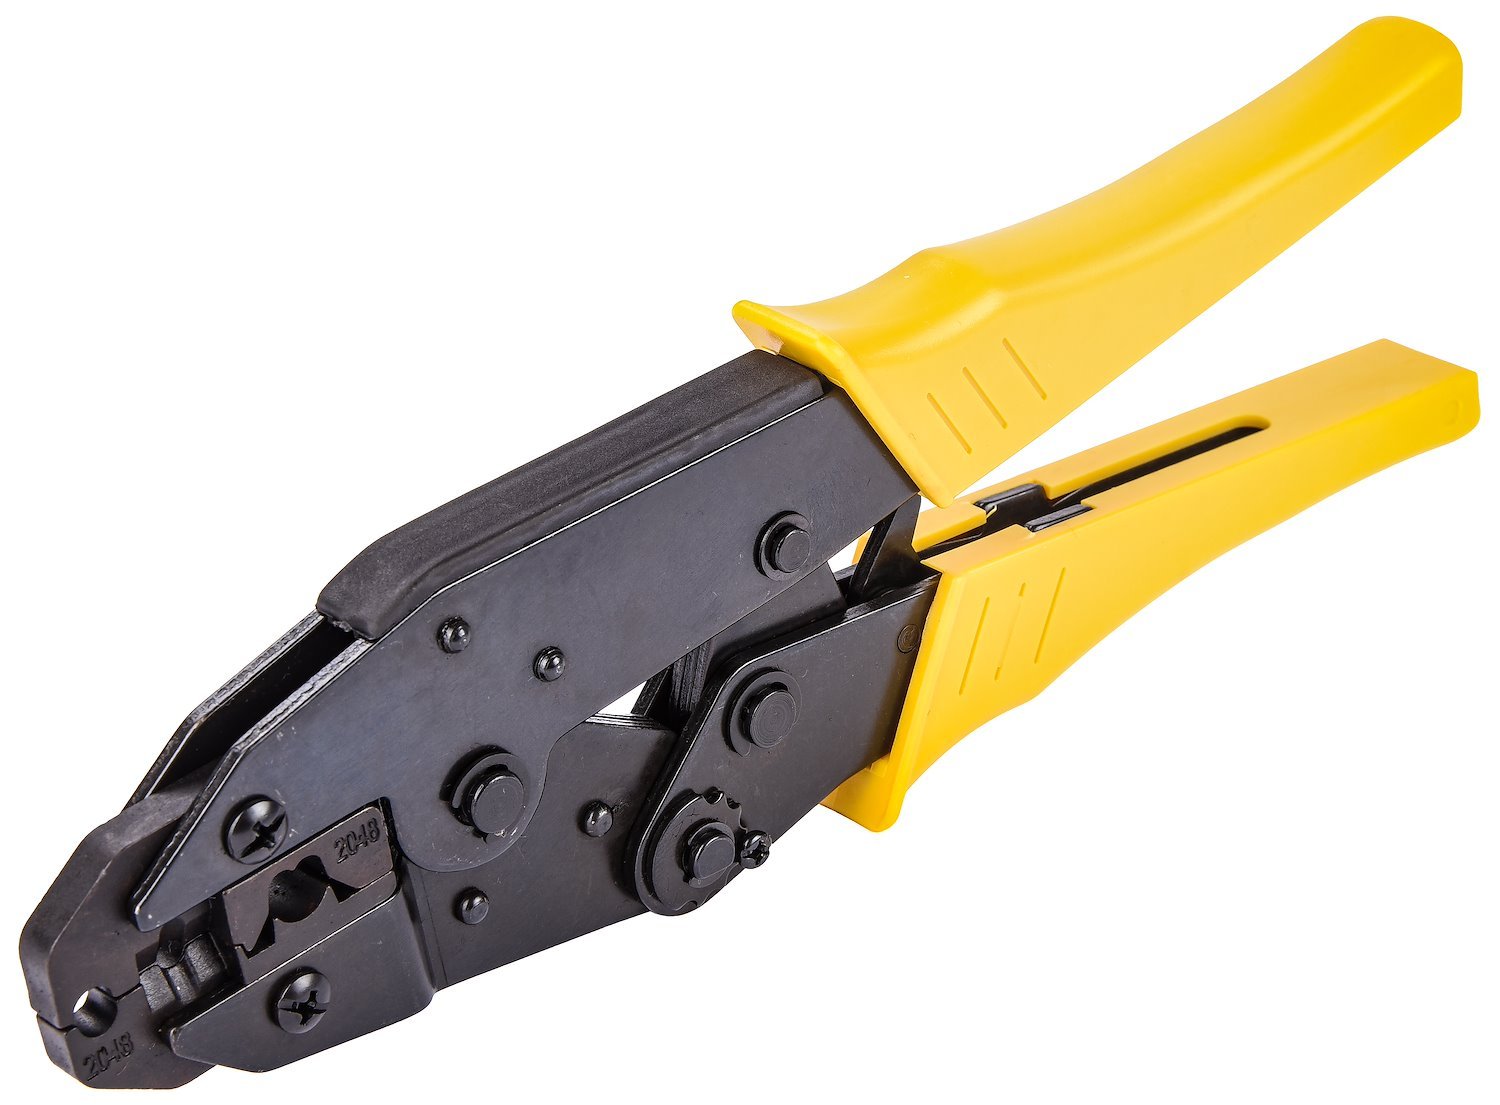 Spark Plug Wire Crimping Tool for 7 mm to 9 mm Wires